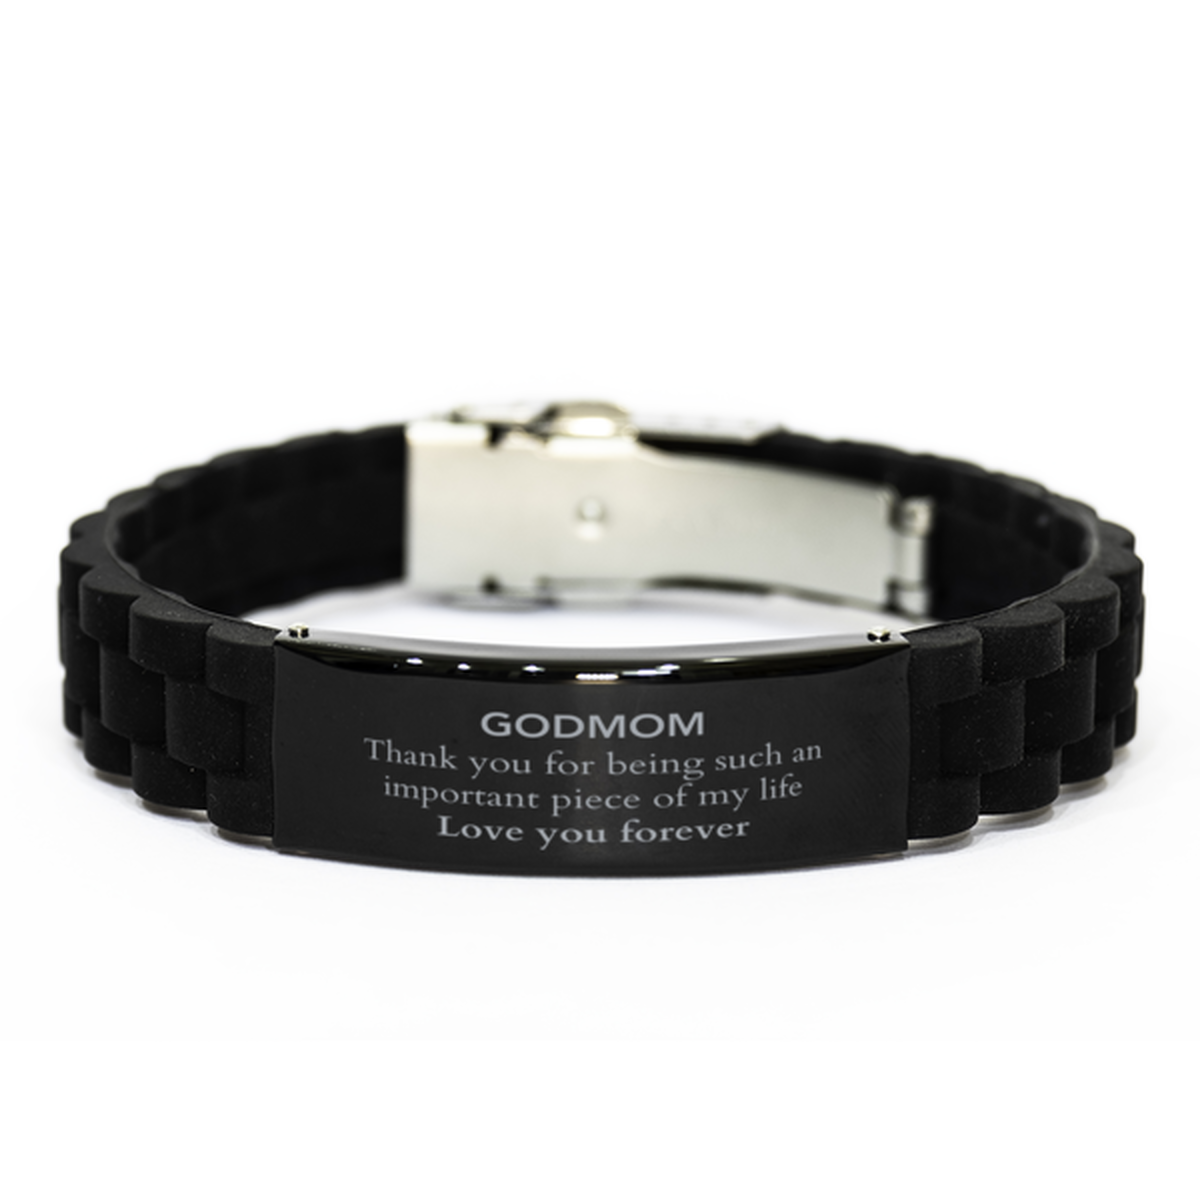 Appropriate Godmom Black Glidelock Clasp Bracelet Epic Birthday Gifts for Godmom Thank you for being such an important piece of my life Godmom Christmas Mothers Fathers Day